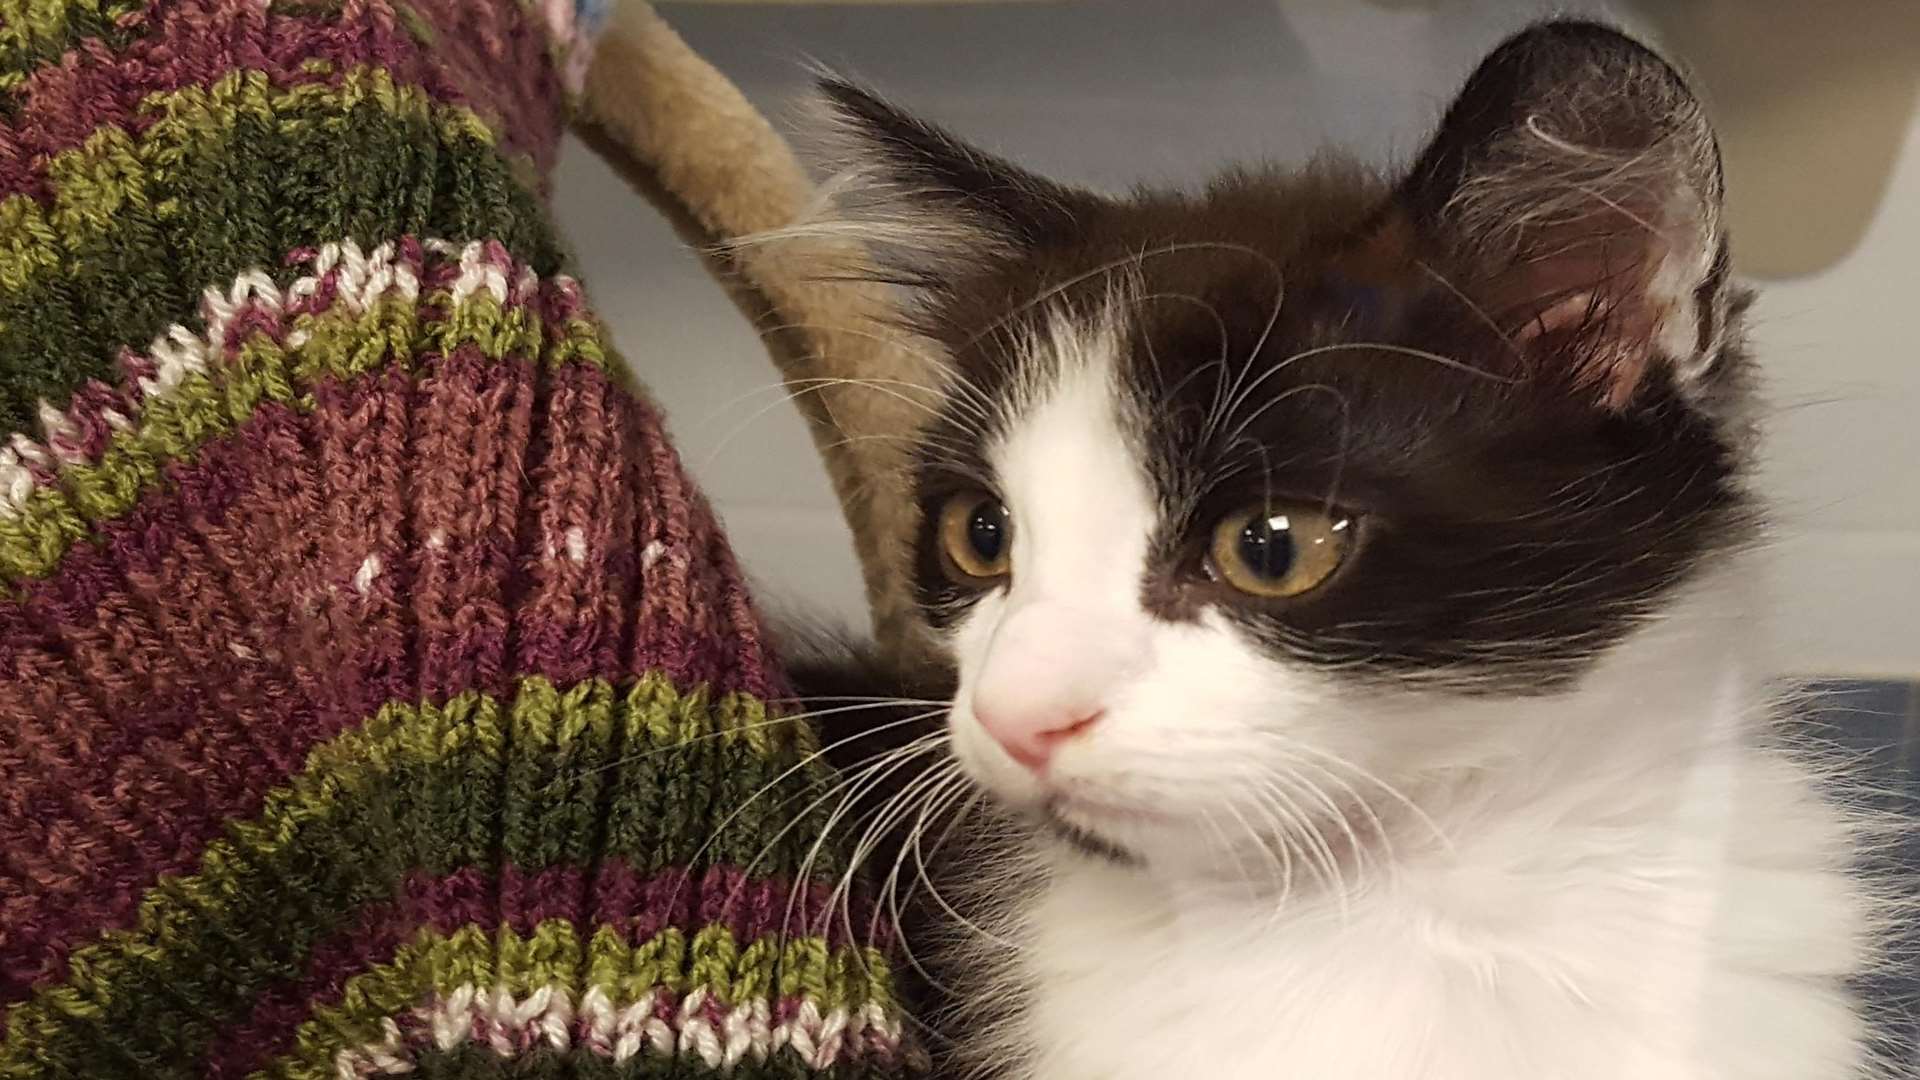 One of many kittens waiting for a forever home